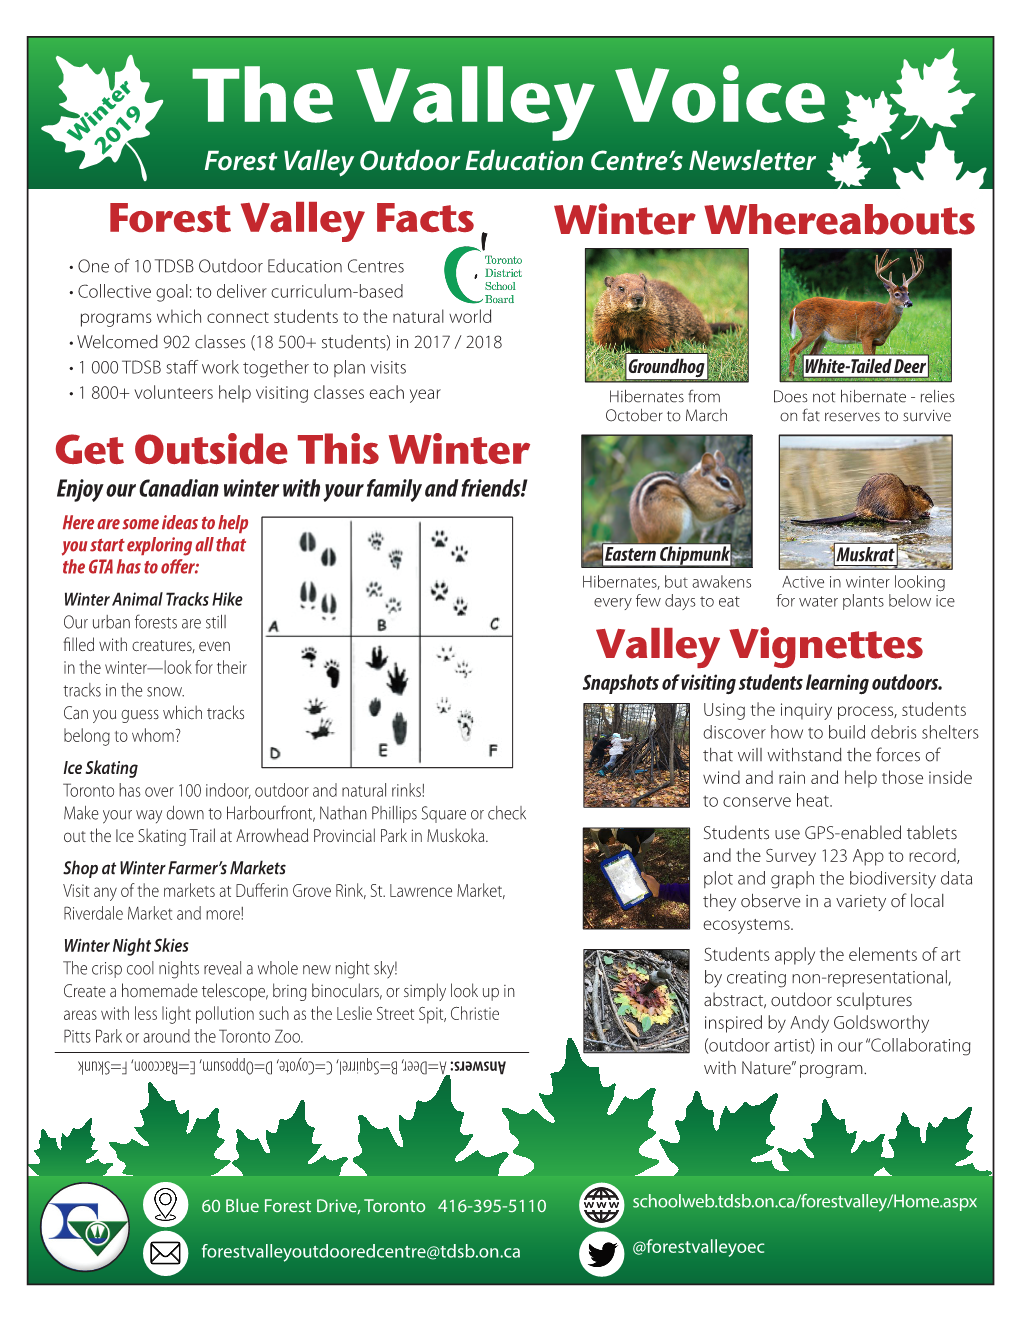 The Valley Voice